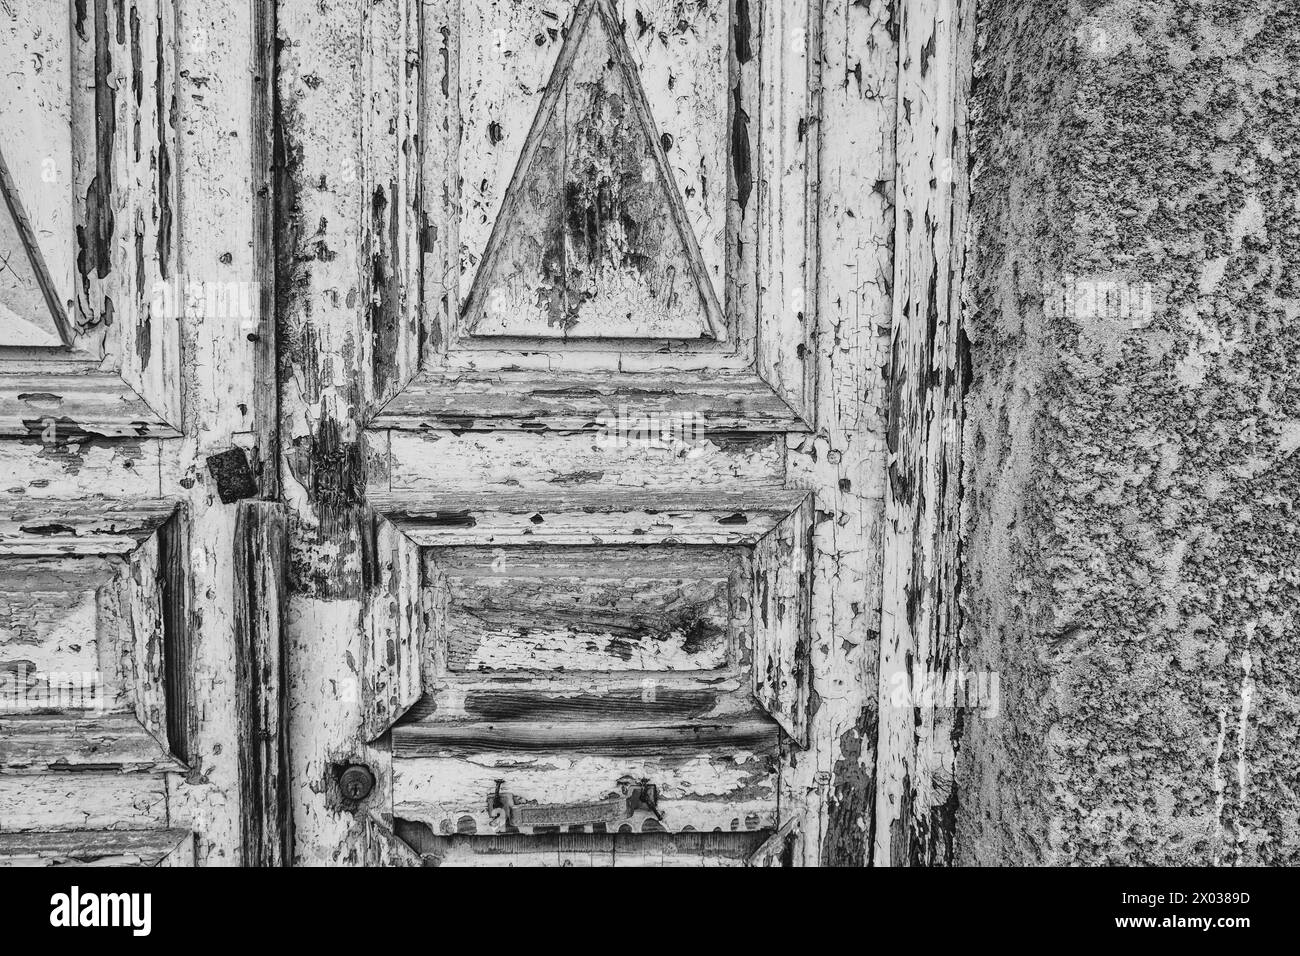 A monochrome view of a weathered wooden door with peeling paint at the entrance to an old arabian house in the Middle East. Stock Photo